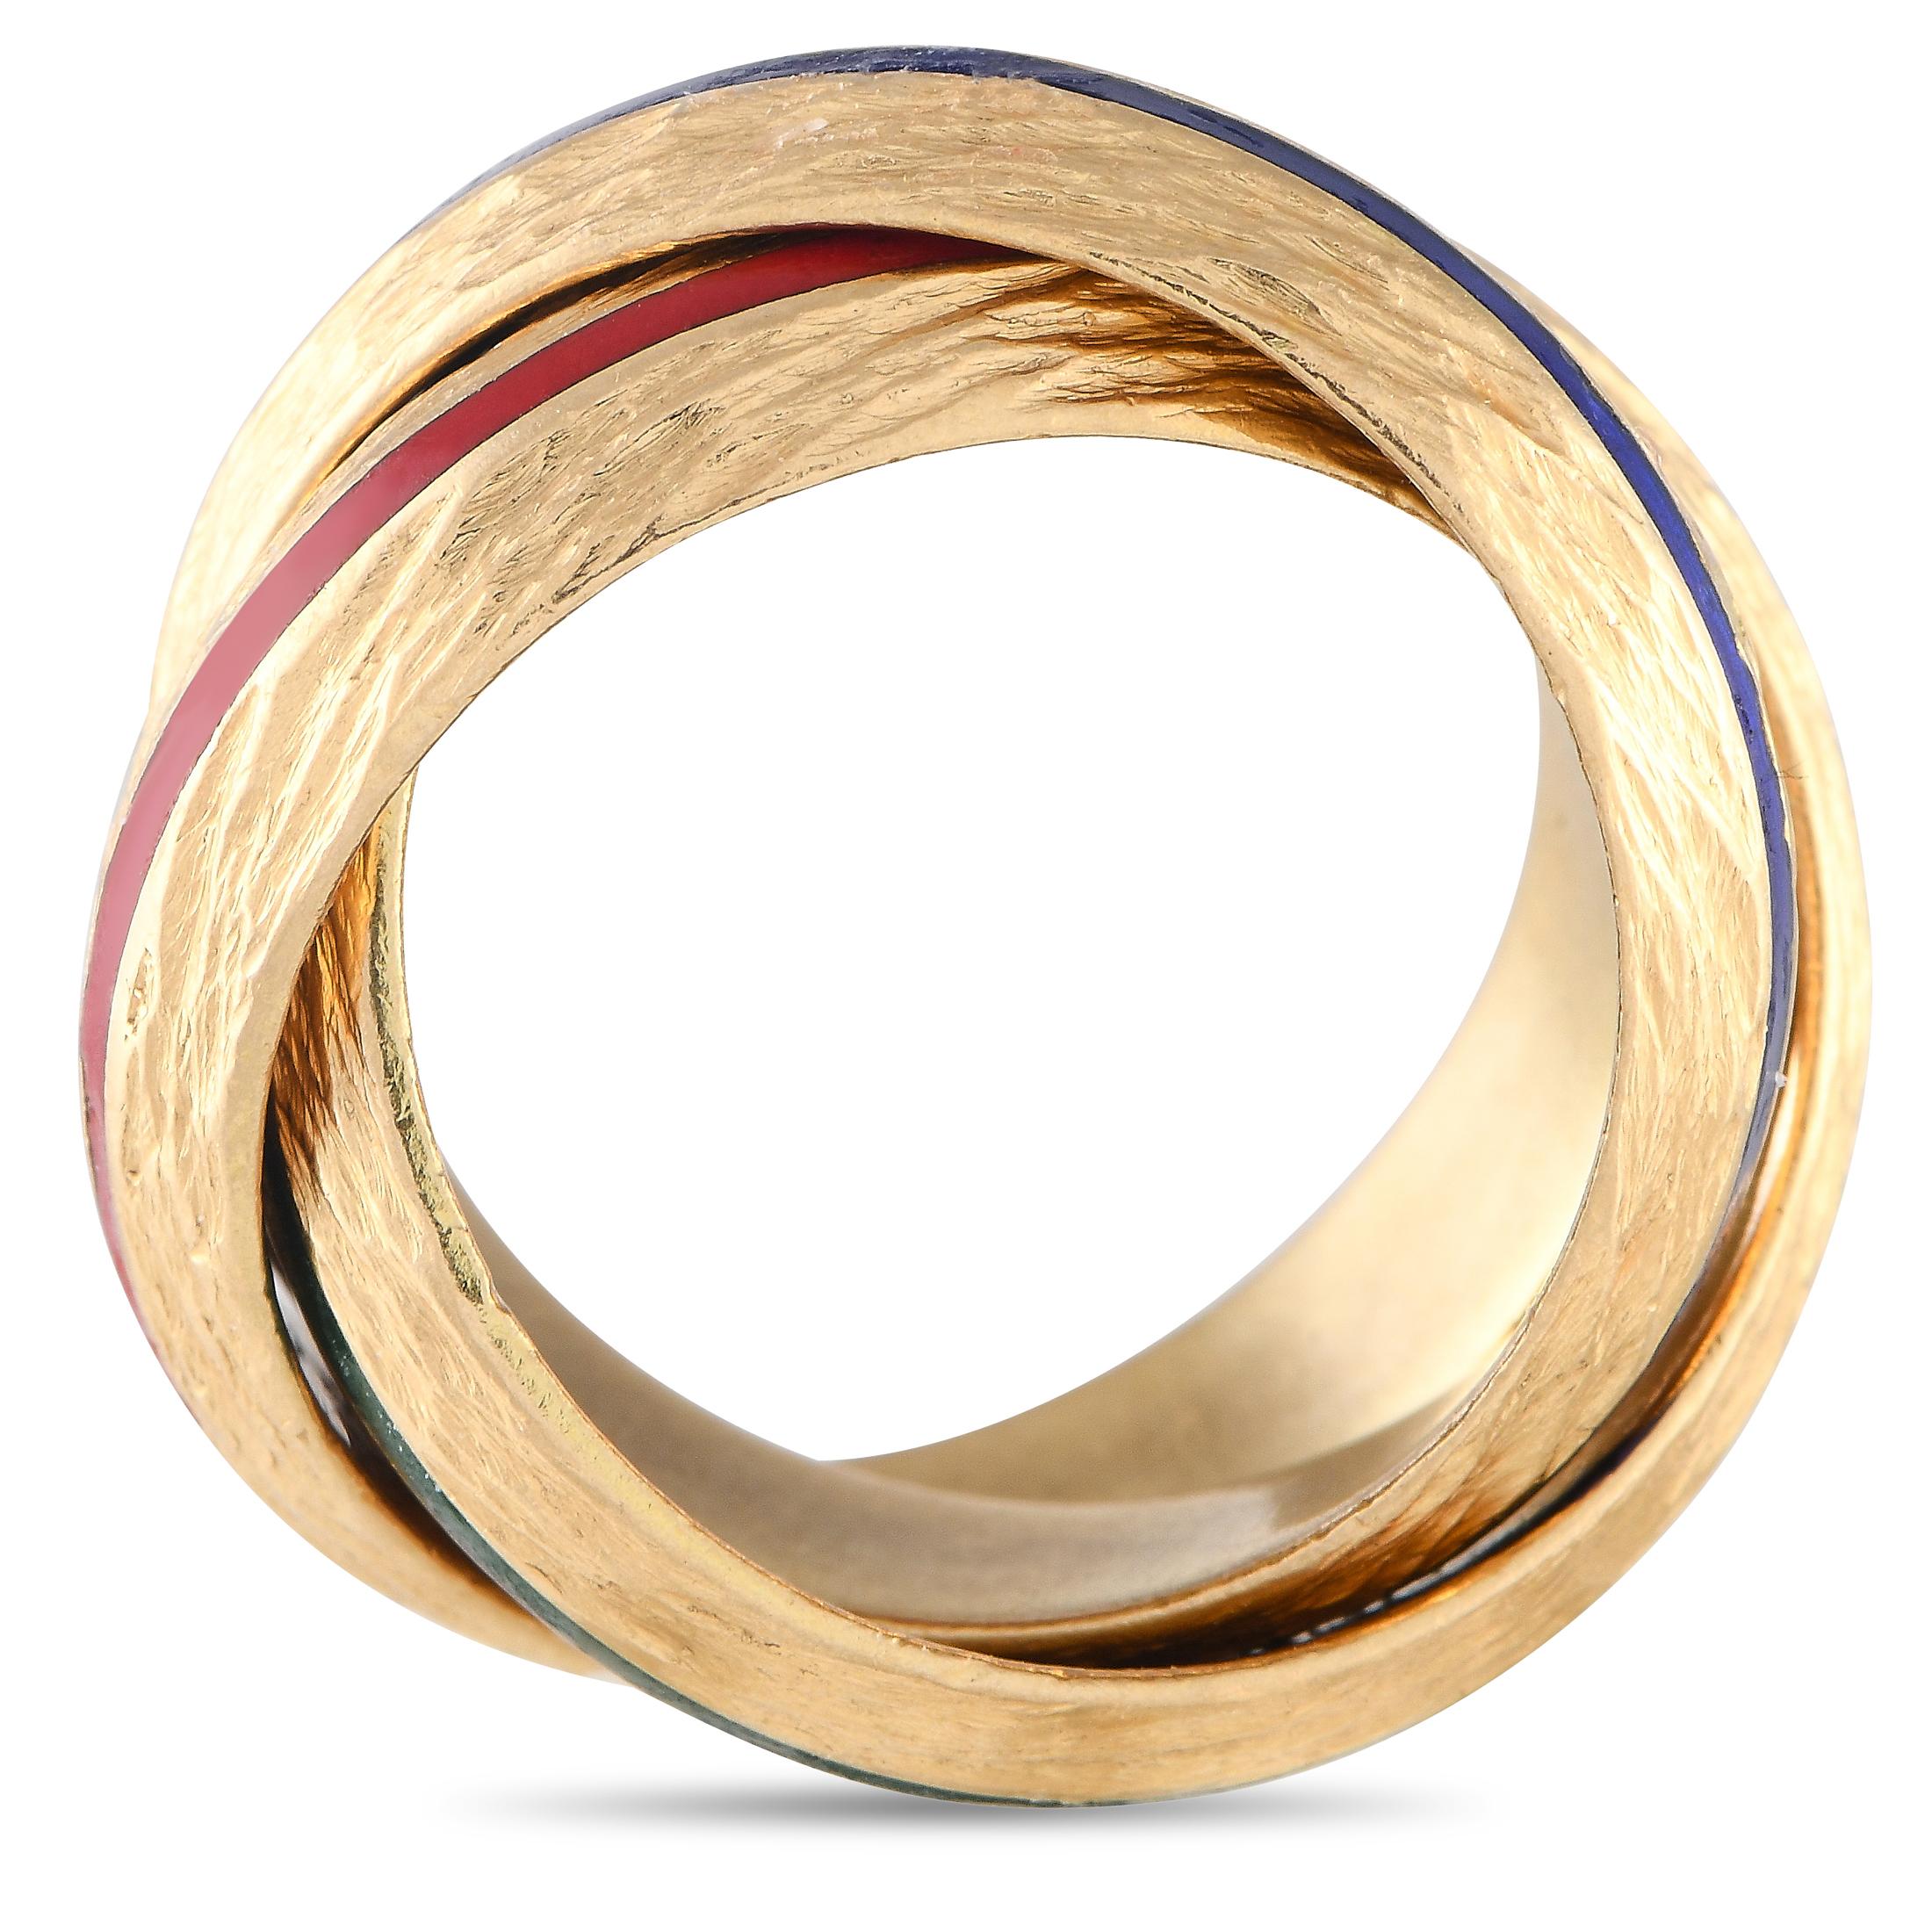 A must-have for your vintage jewelry collection. This extraordinary piece from Hermès presents three solid gold bands intertwined to form a single ring. Each 18K yellow gold band has a textured finish and an enameled ribbon accent - in red, green,